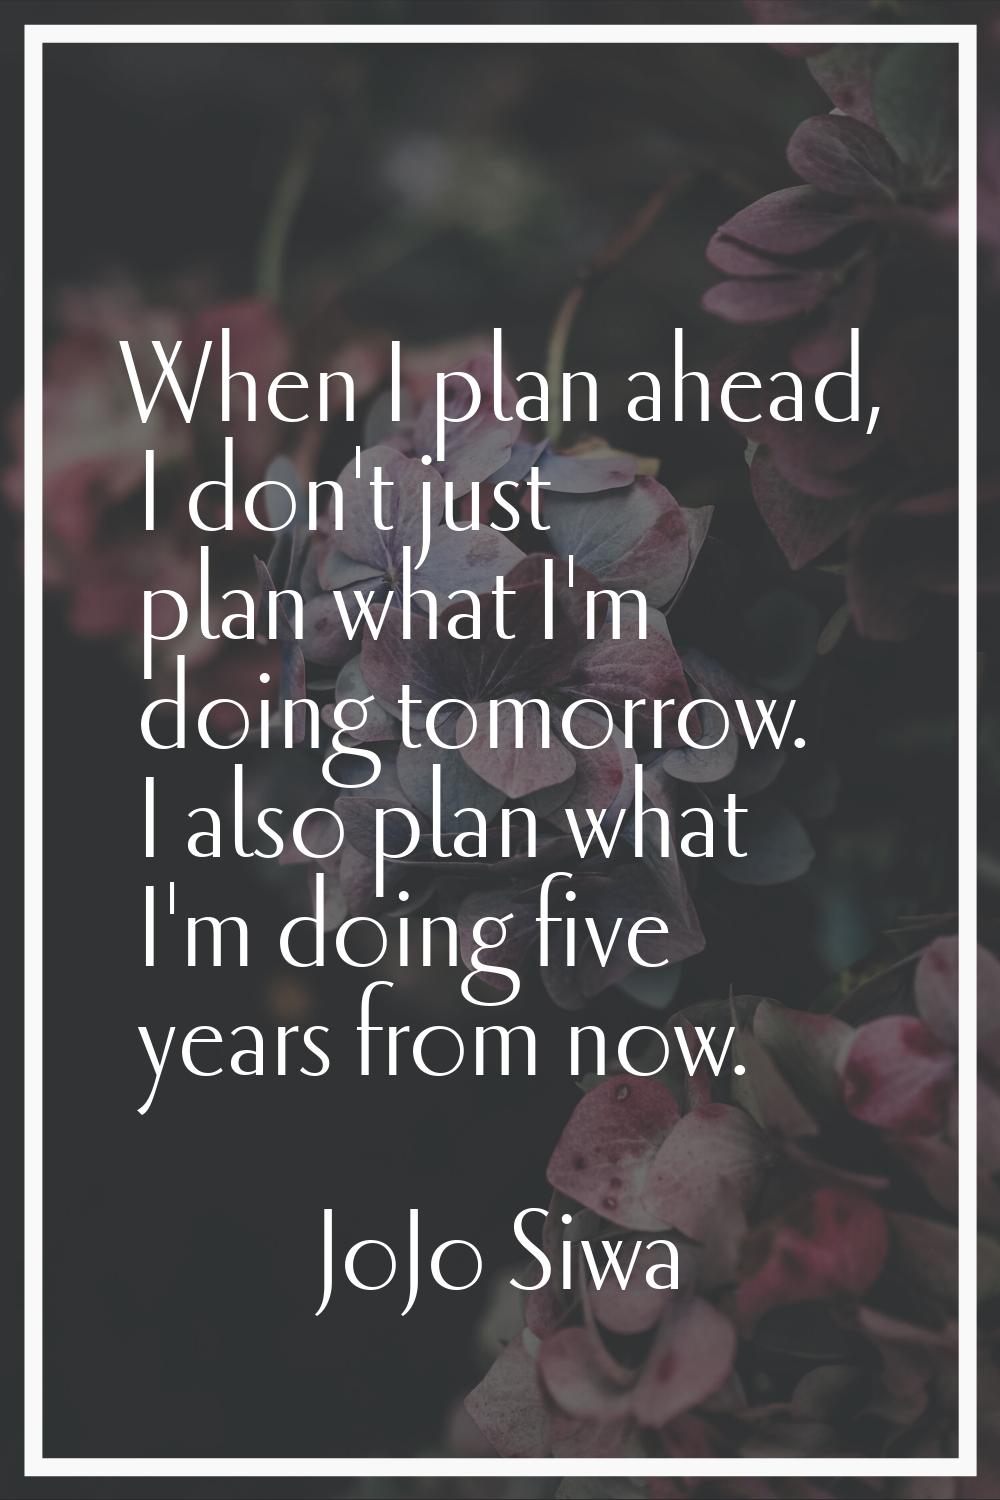 When I plan ahead, I don't just plan what I'm doing tomorrow. I also plan what I'm doing five years